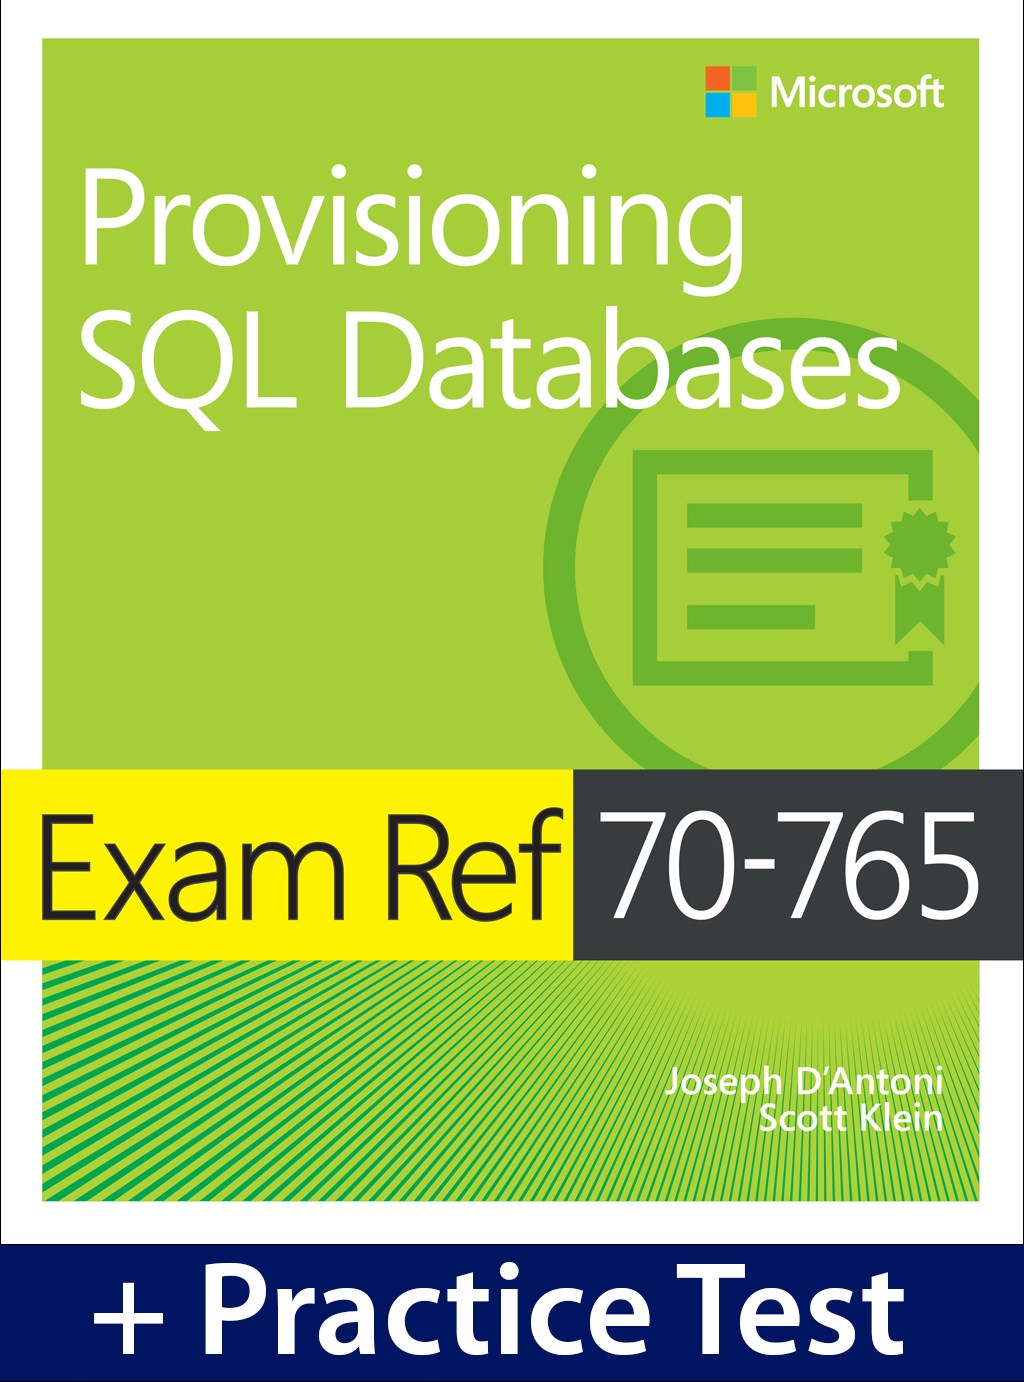 Exam Ref 70-765 Provisioning SQL Databases with Practice Test